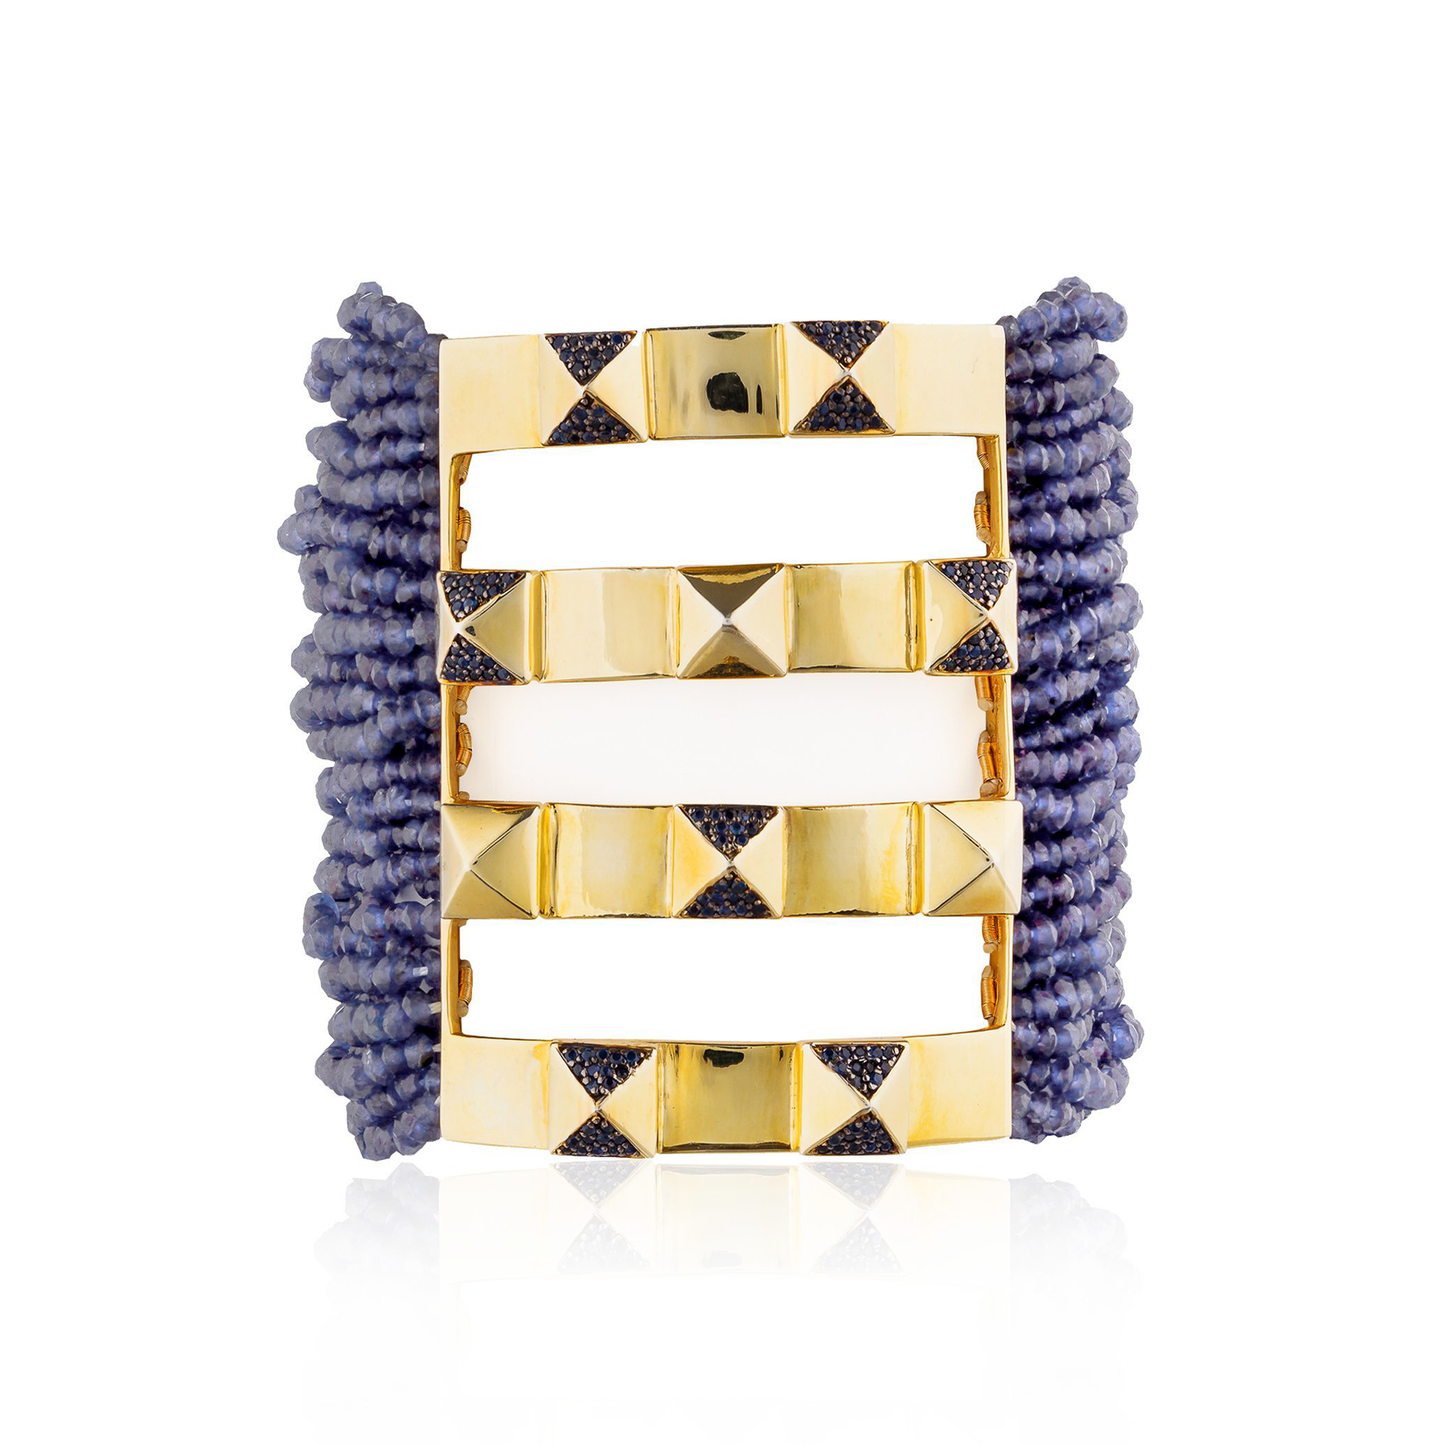 Zinta 925 Silver Stud Bracelet with Iolite and Sapphires